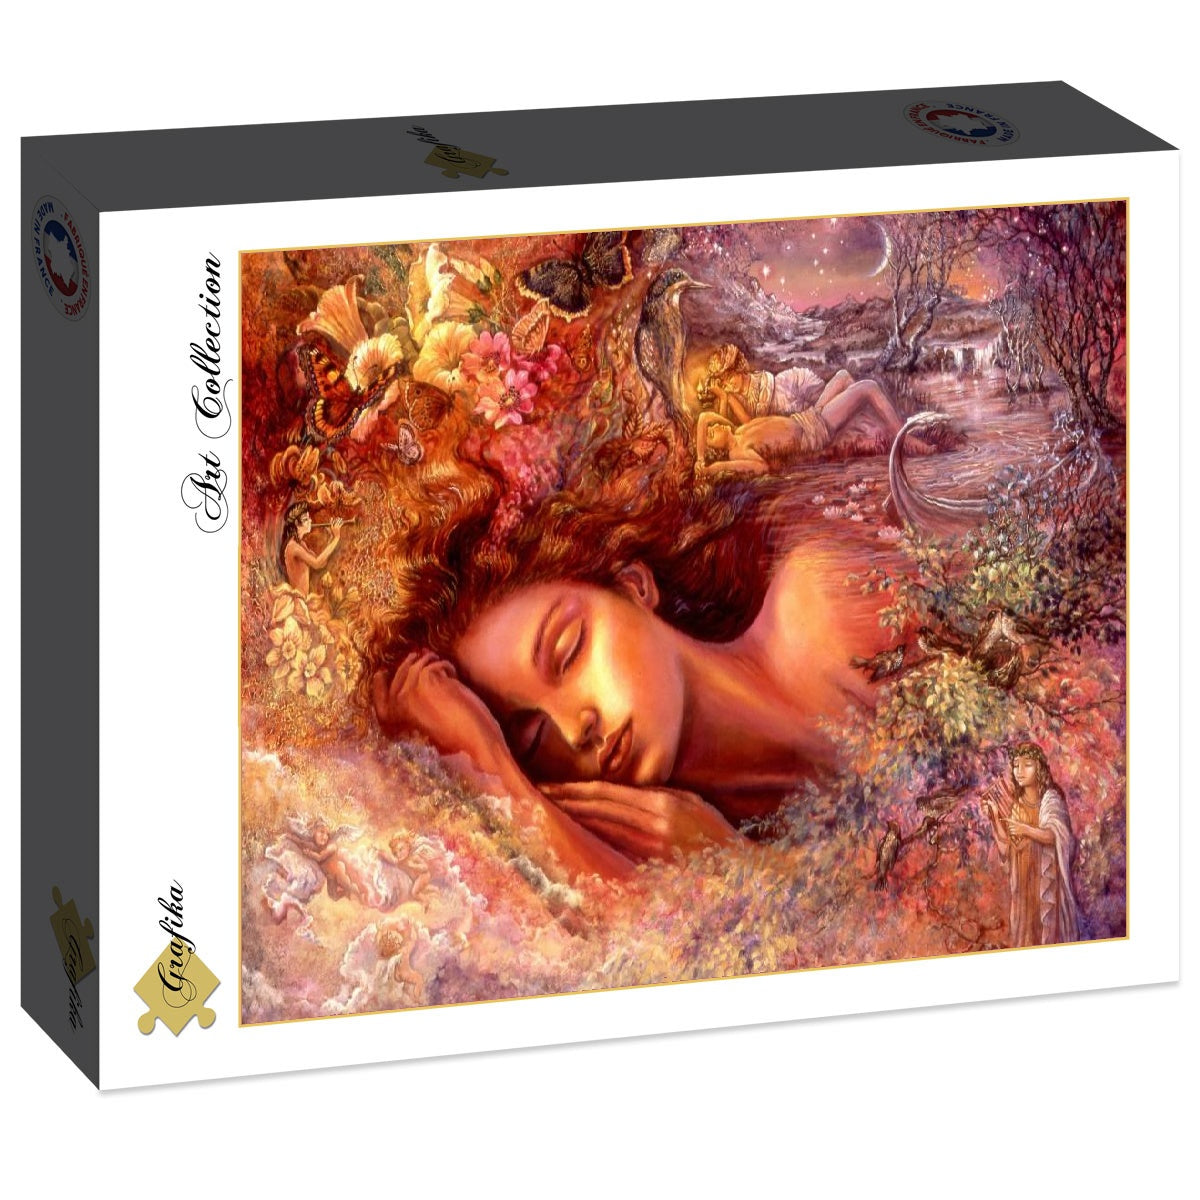 Psyche's Dreams by Josephine Wall, 2000 Piece Puzzle